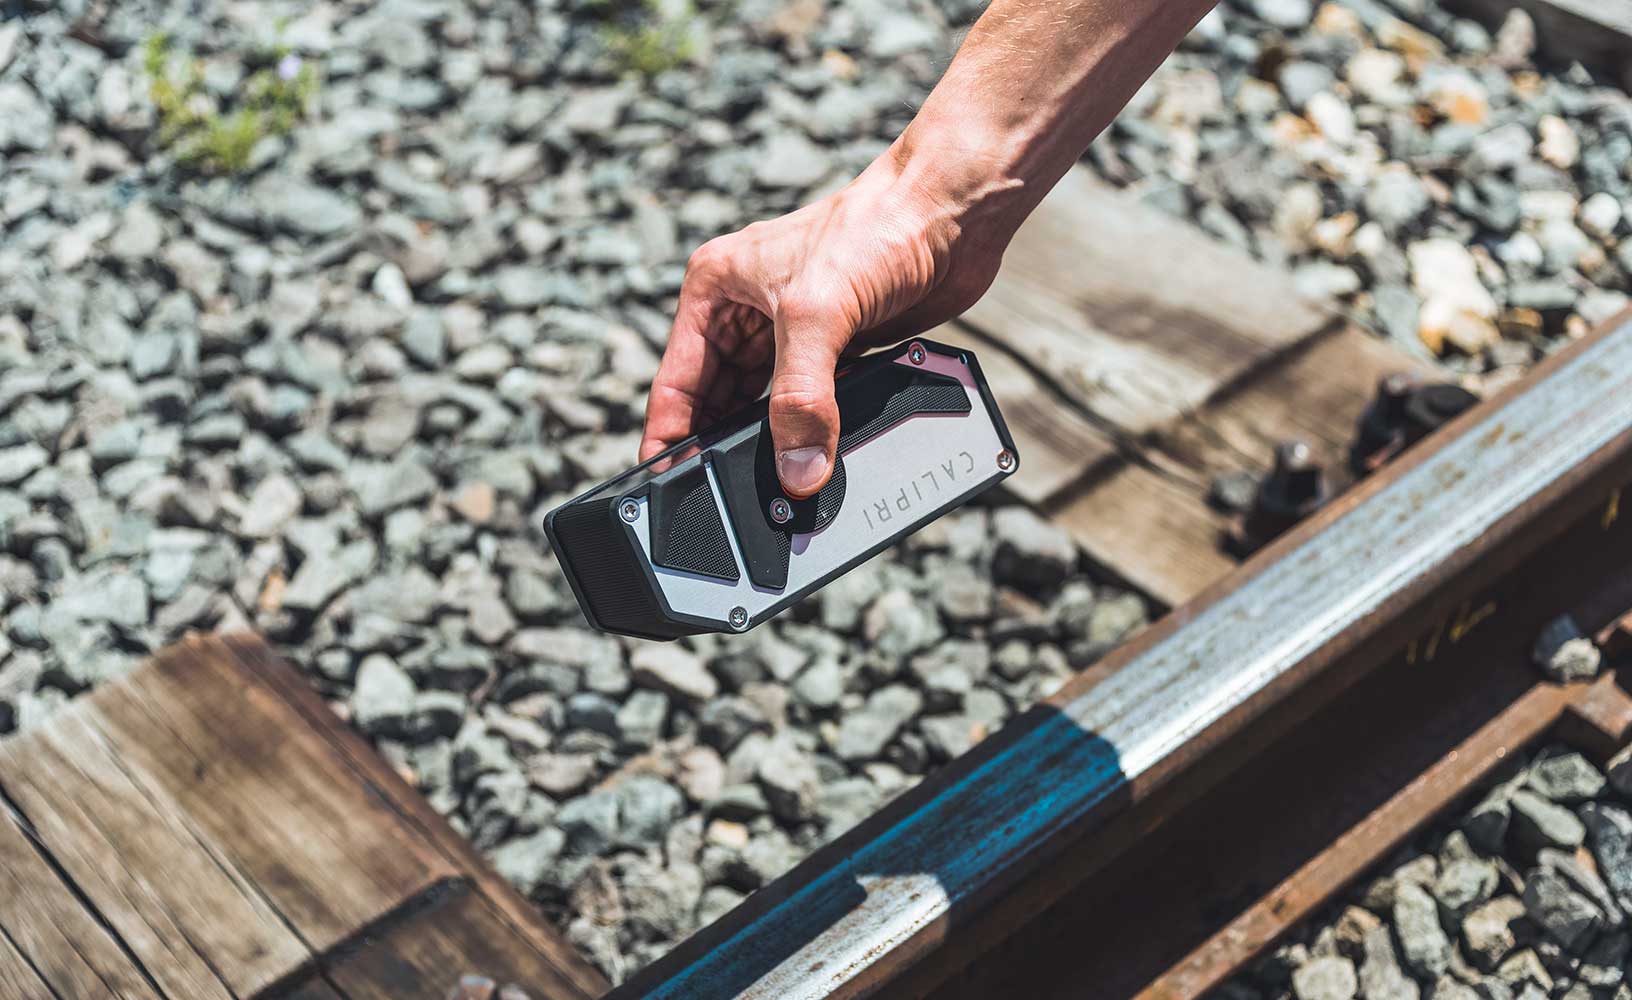 Close up view of CALIPRI handheld sensor at work in rail and transit network inspection